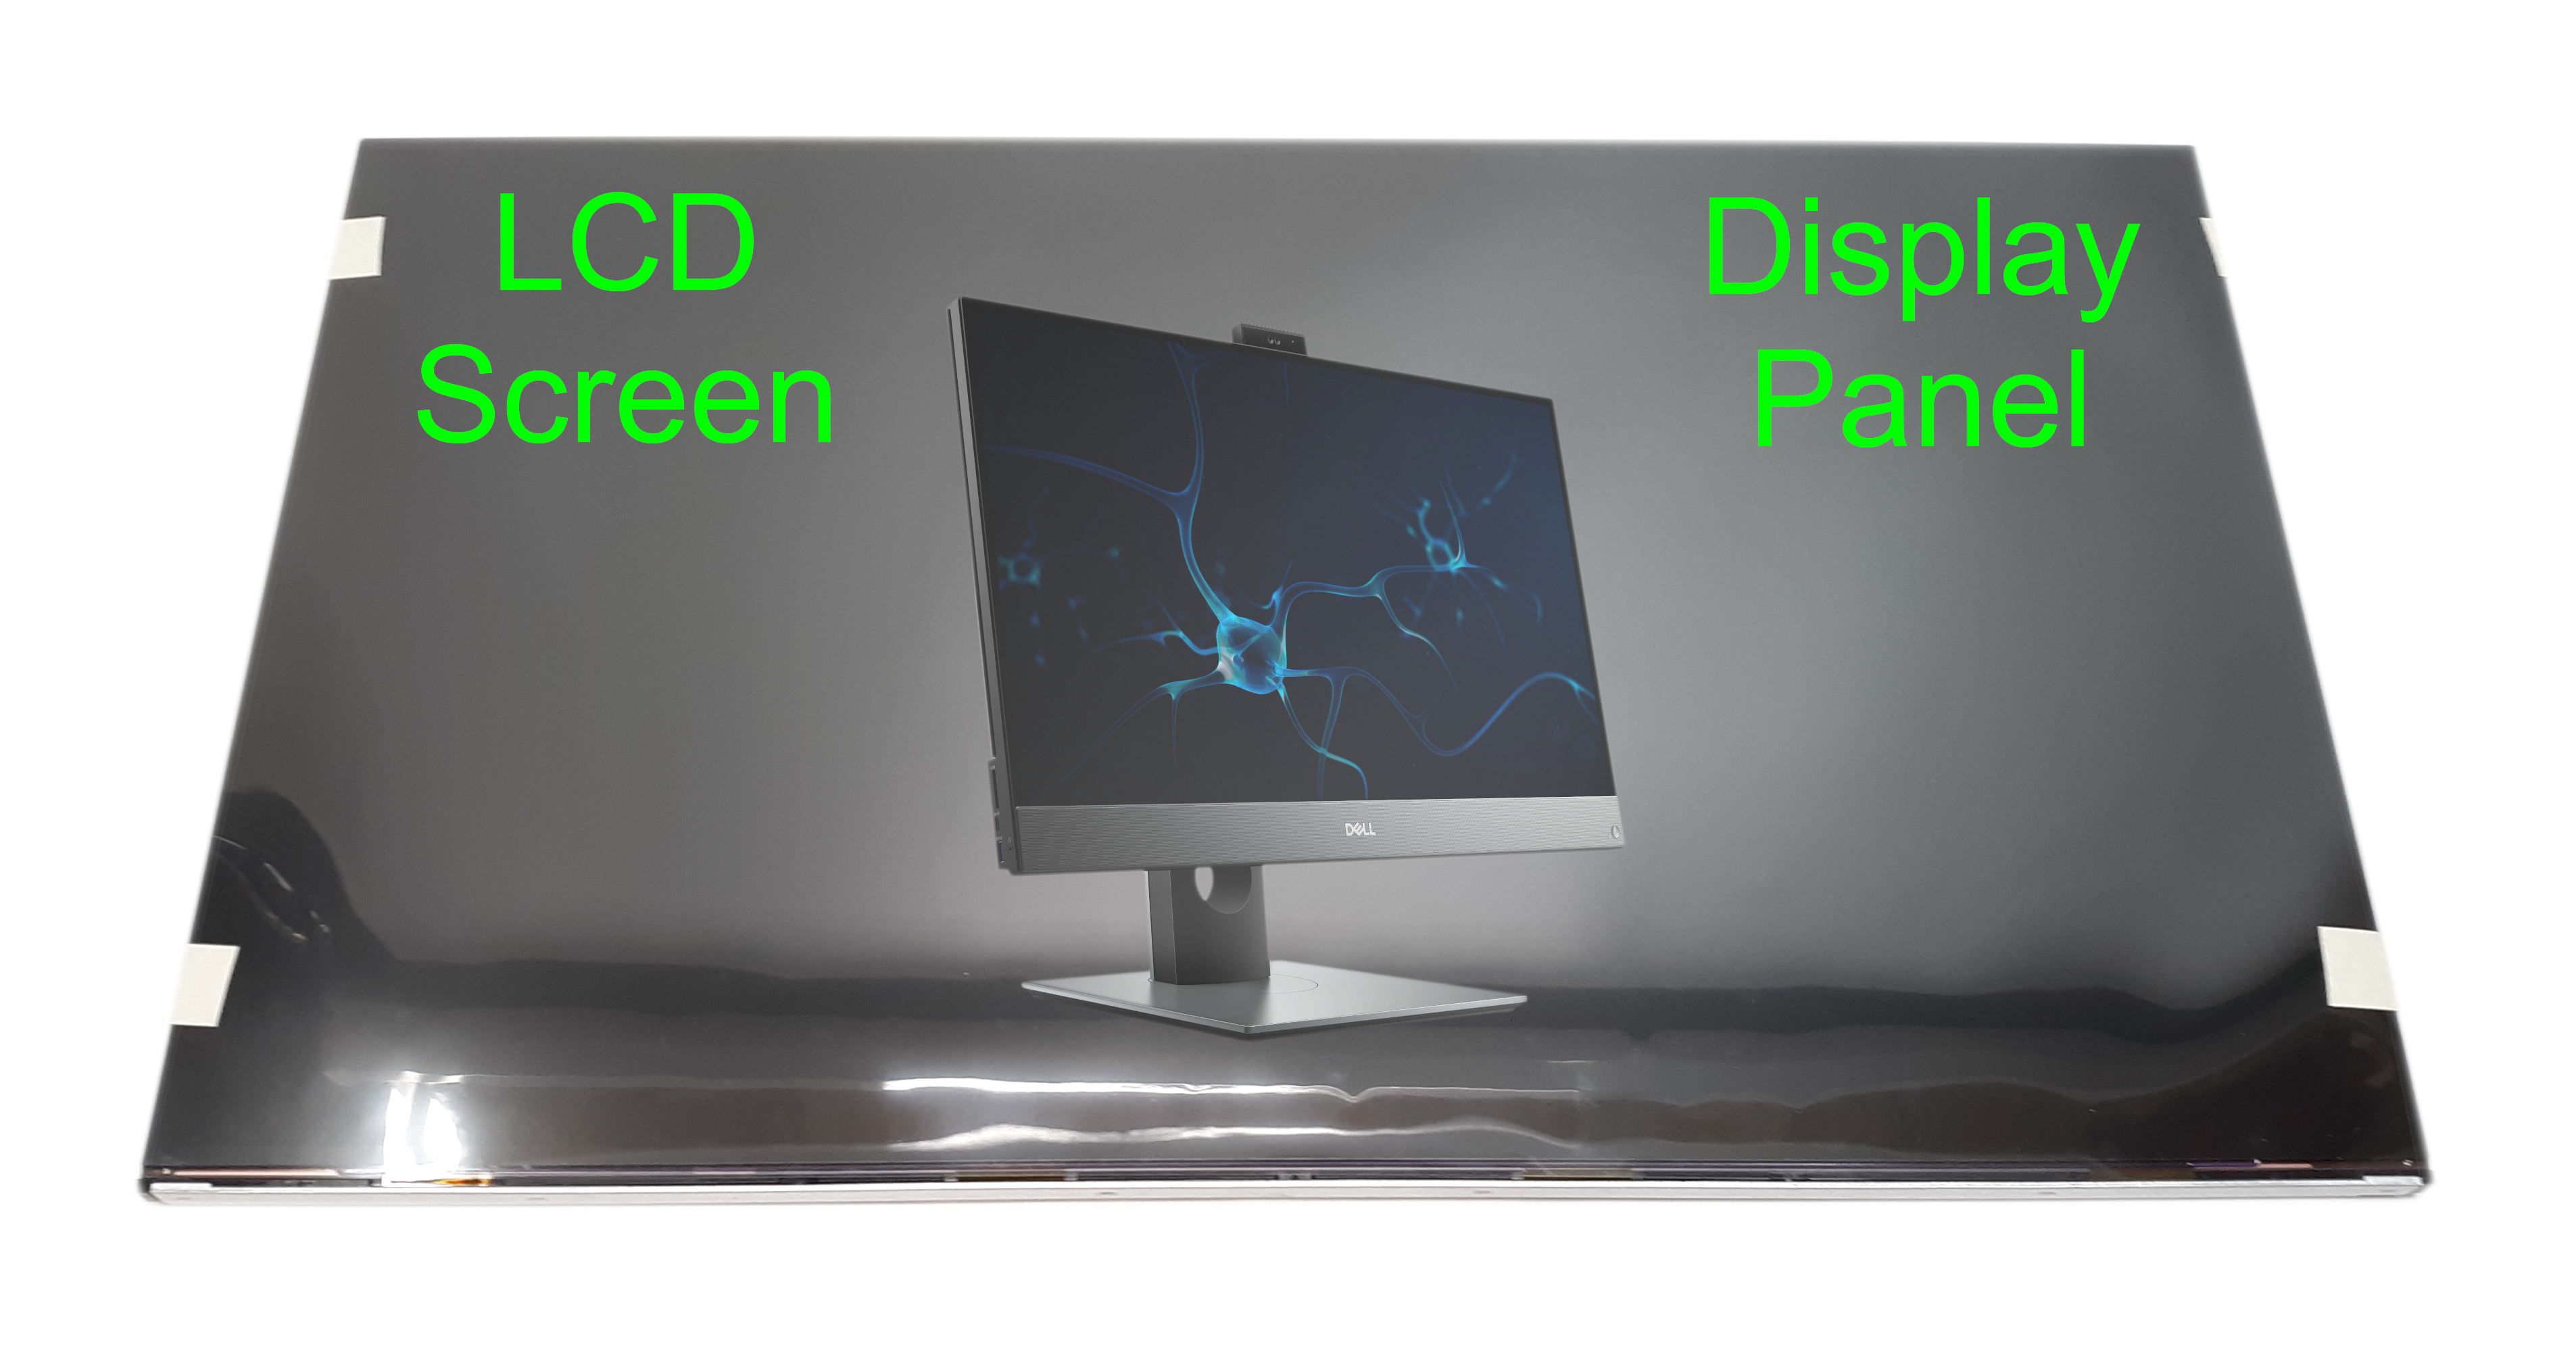 LG Display Panel LCD Screen 27" for Dell OptiPlex 7780 Inspiron 7700 LM270WF7 (SS)(D1) 06PY8J